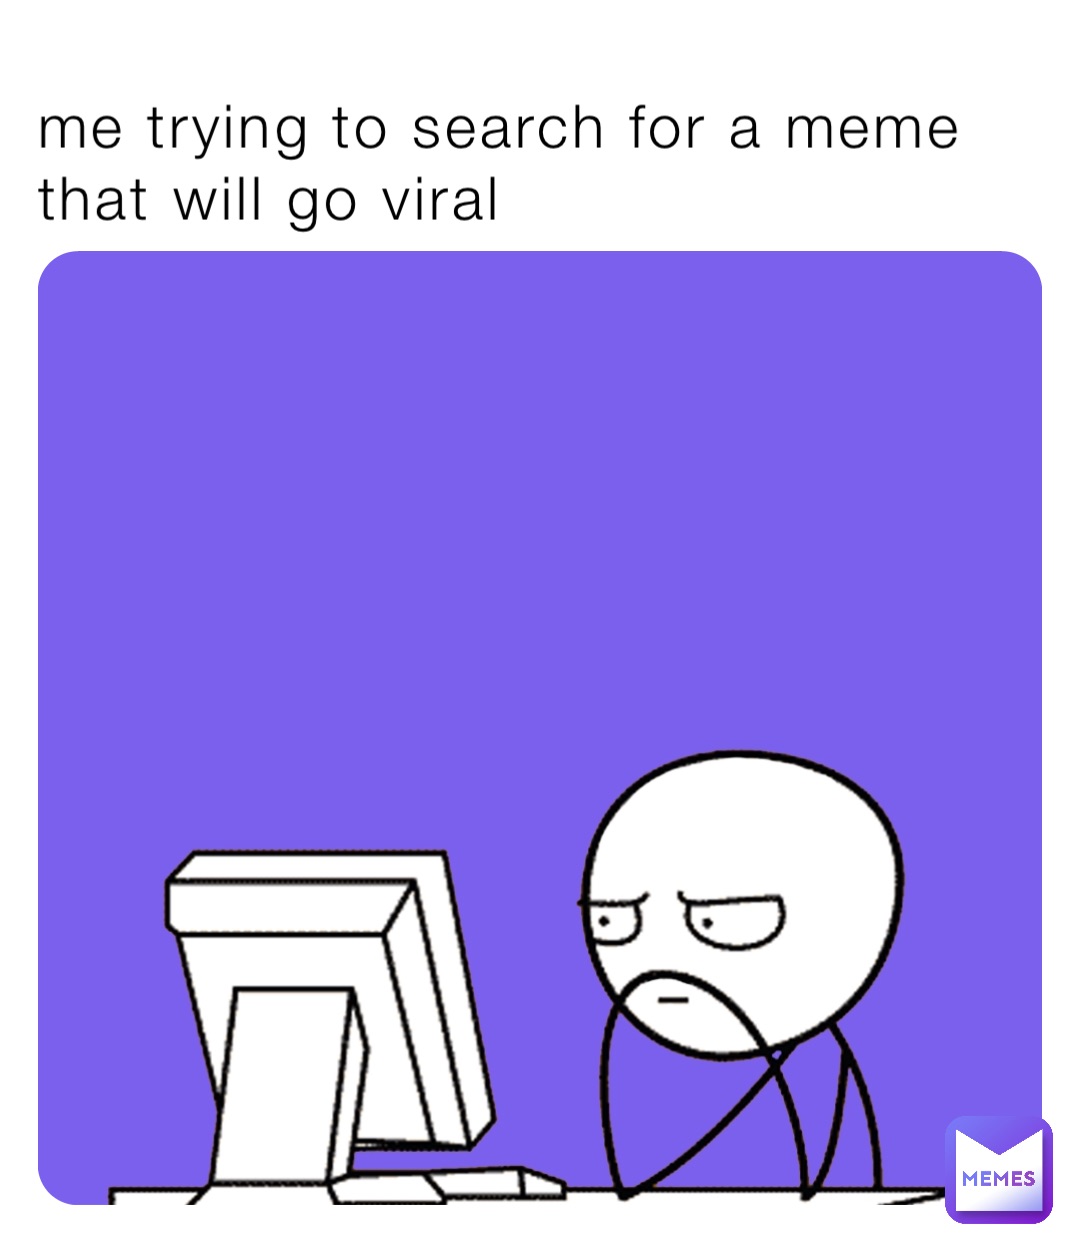 me trying to search for a meme that will go viral